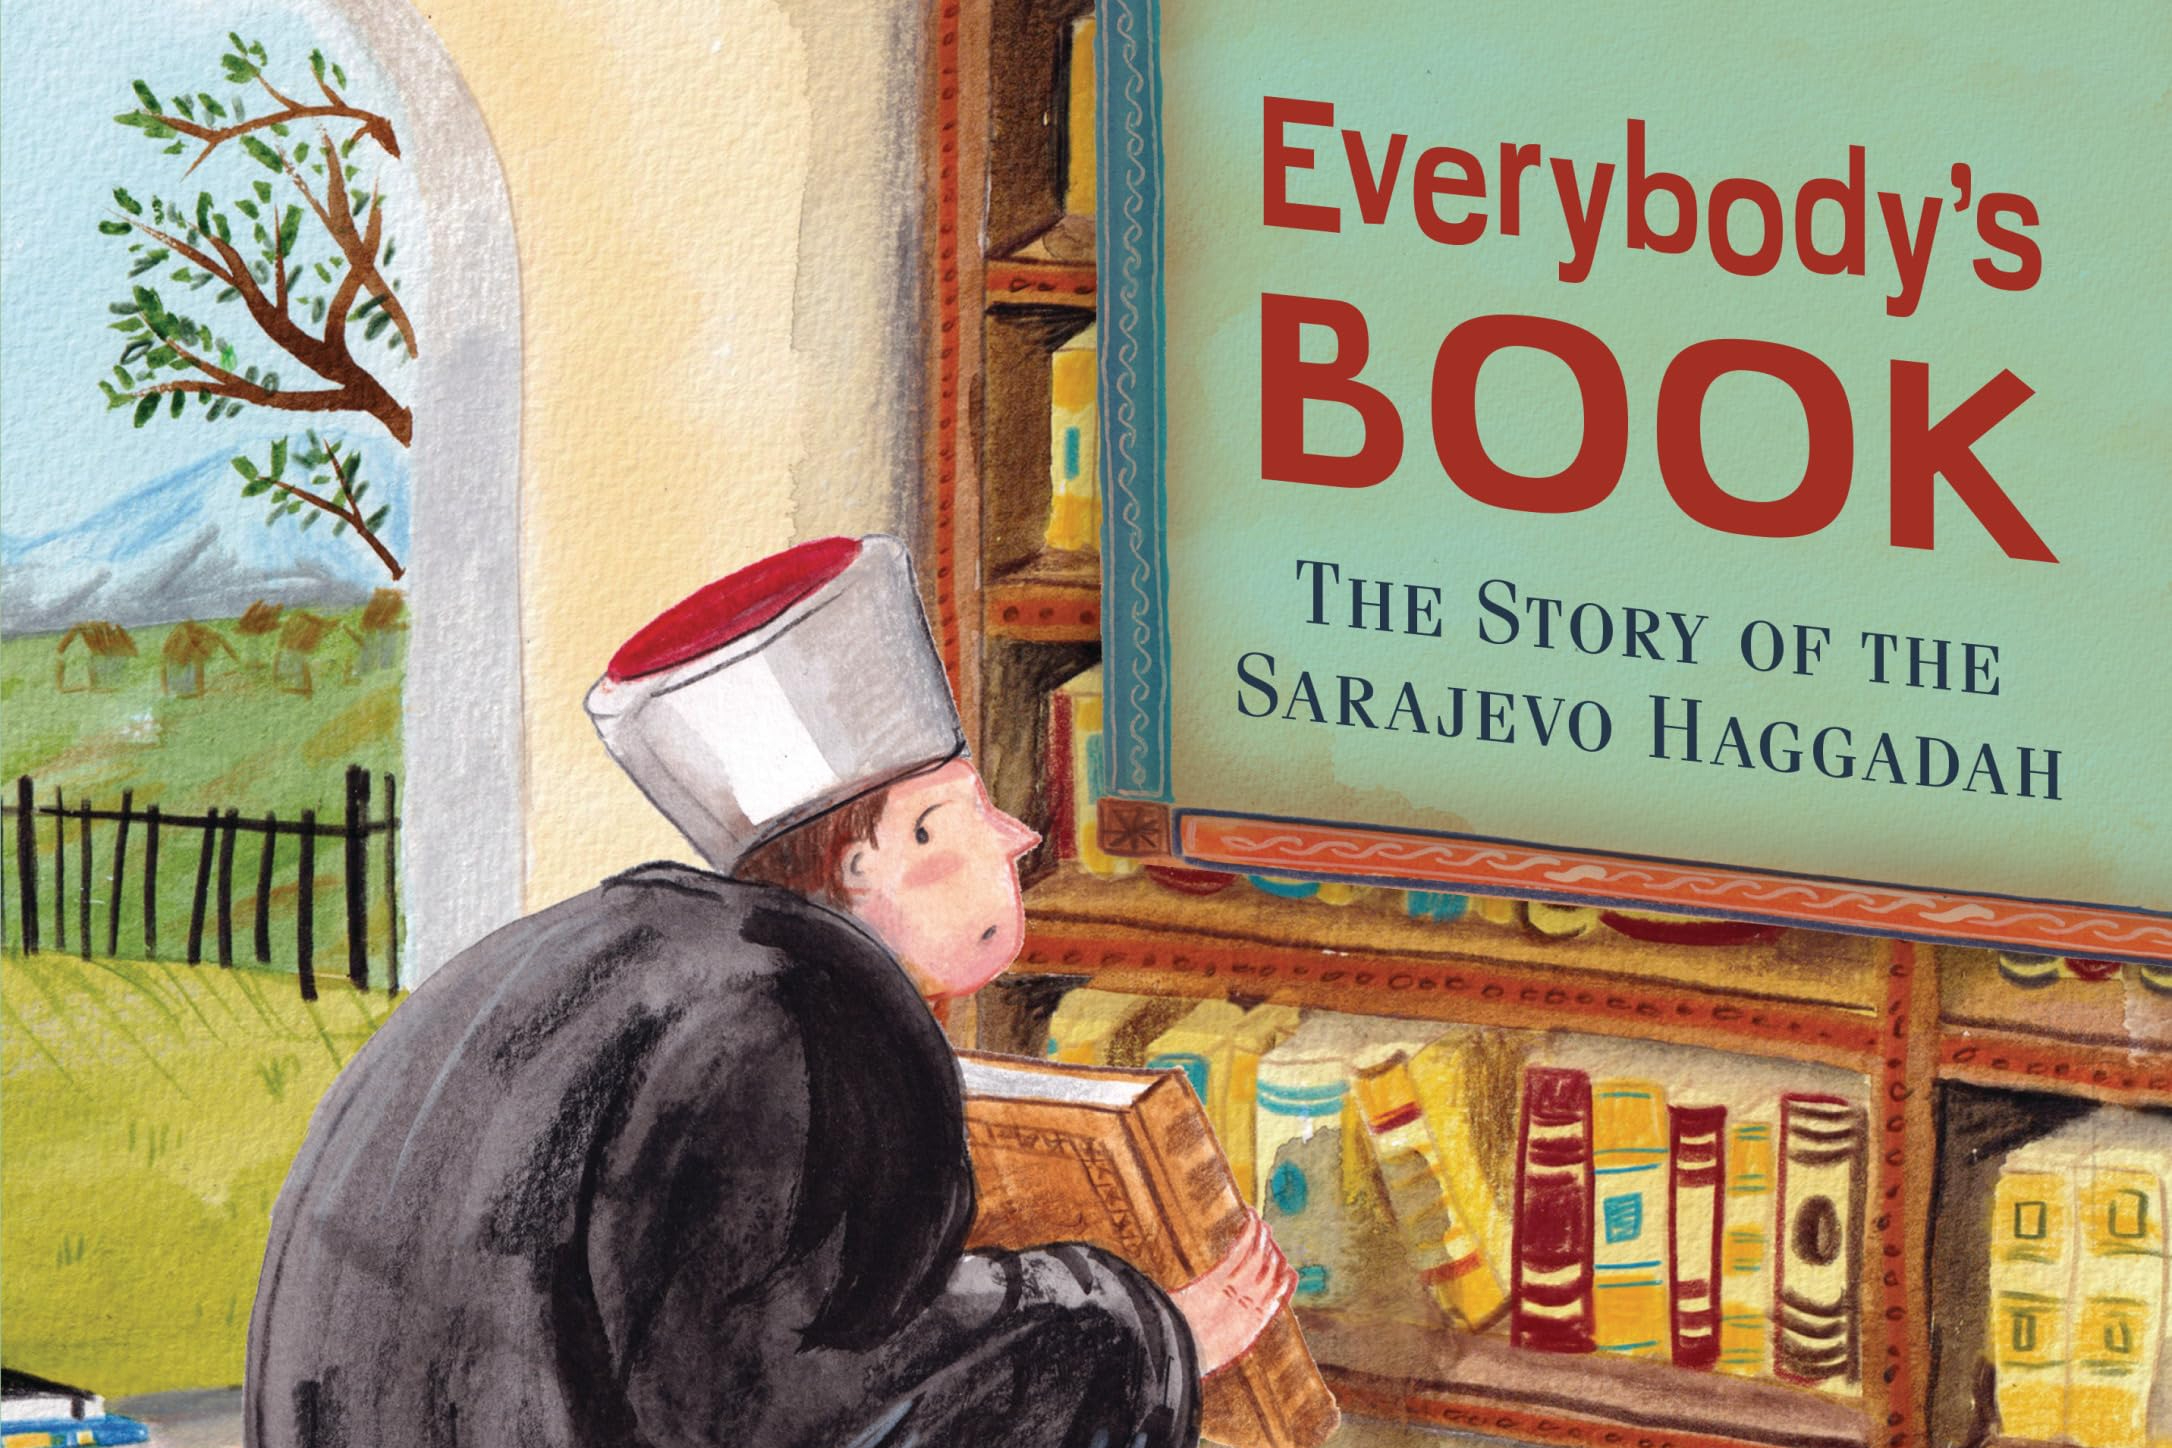 Everybody’s Book; The Story of the Sarajevo Haggadah by Linda Leopold Strauss Reviewed by Connie Nordhielm Wooldridge…